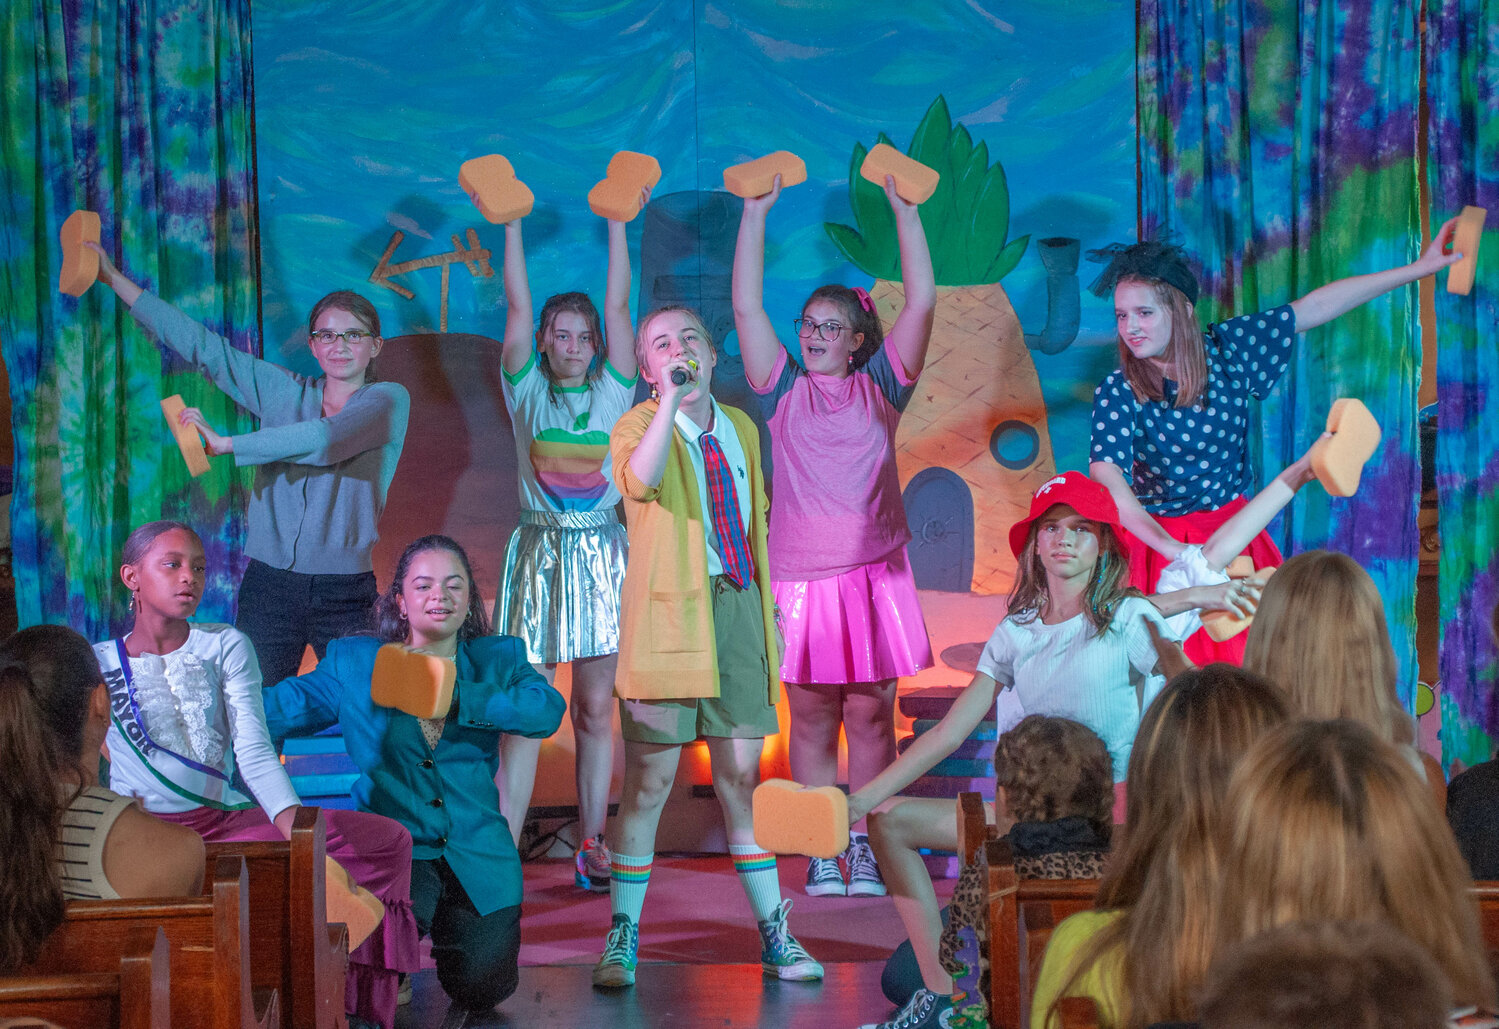 I was blown away by the Forestburgh Playhouse Academy production of "The SpongeBob Musical," replete with professional sets, costumes, lighting and sound.